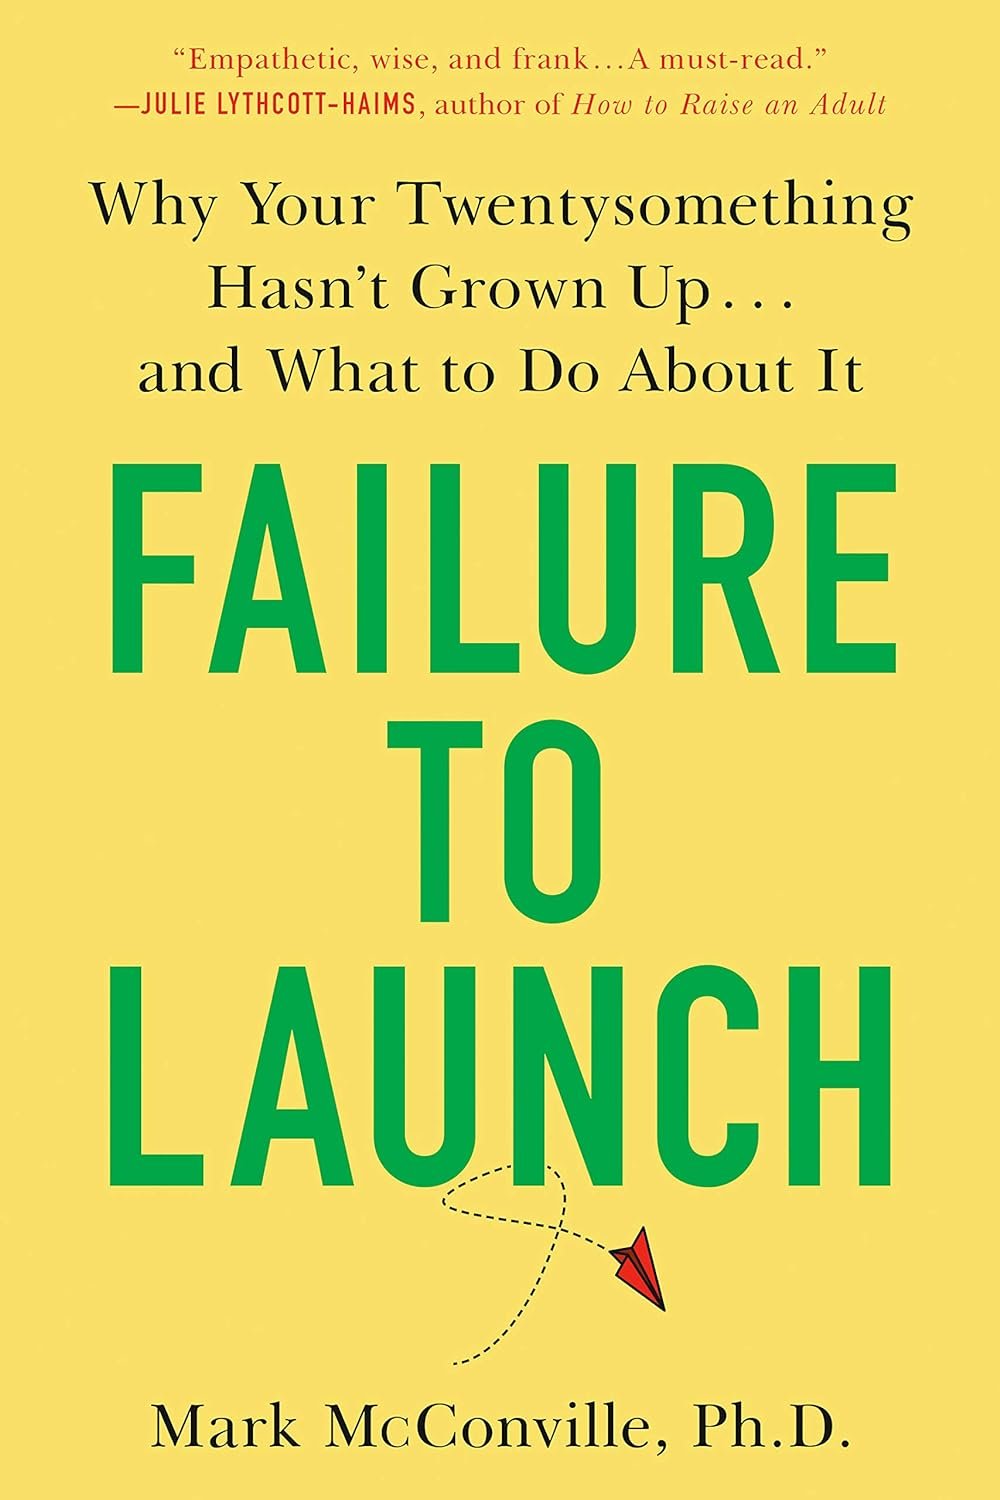  Failure to Launch: Why Your Twentysomething Hasn't Grown Up...and What to Do About It